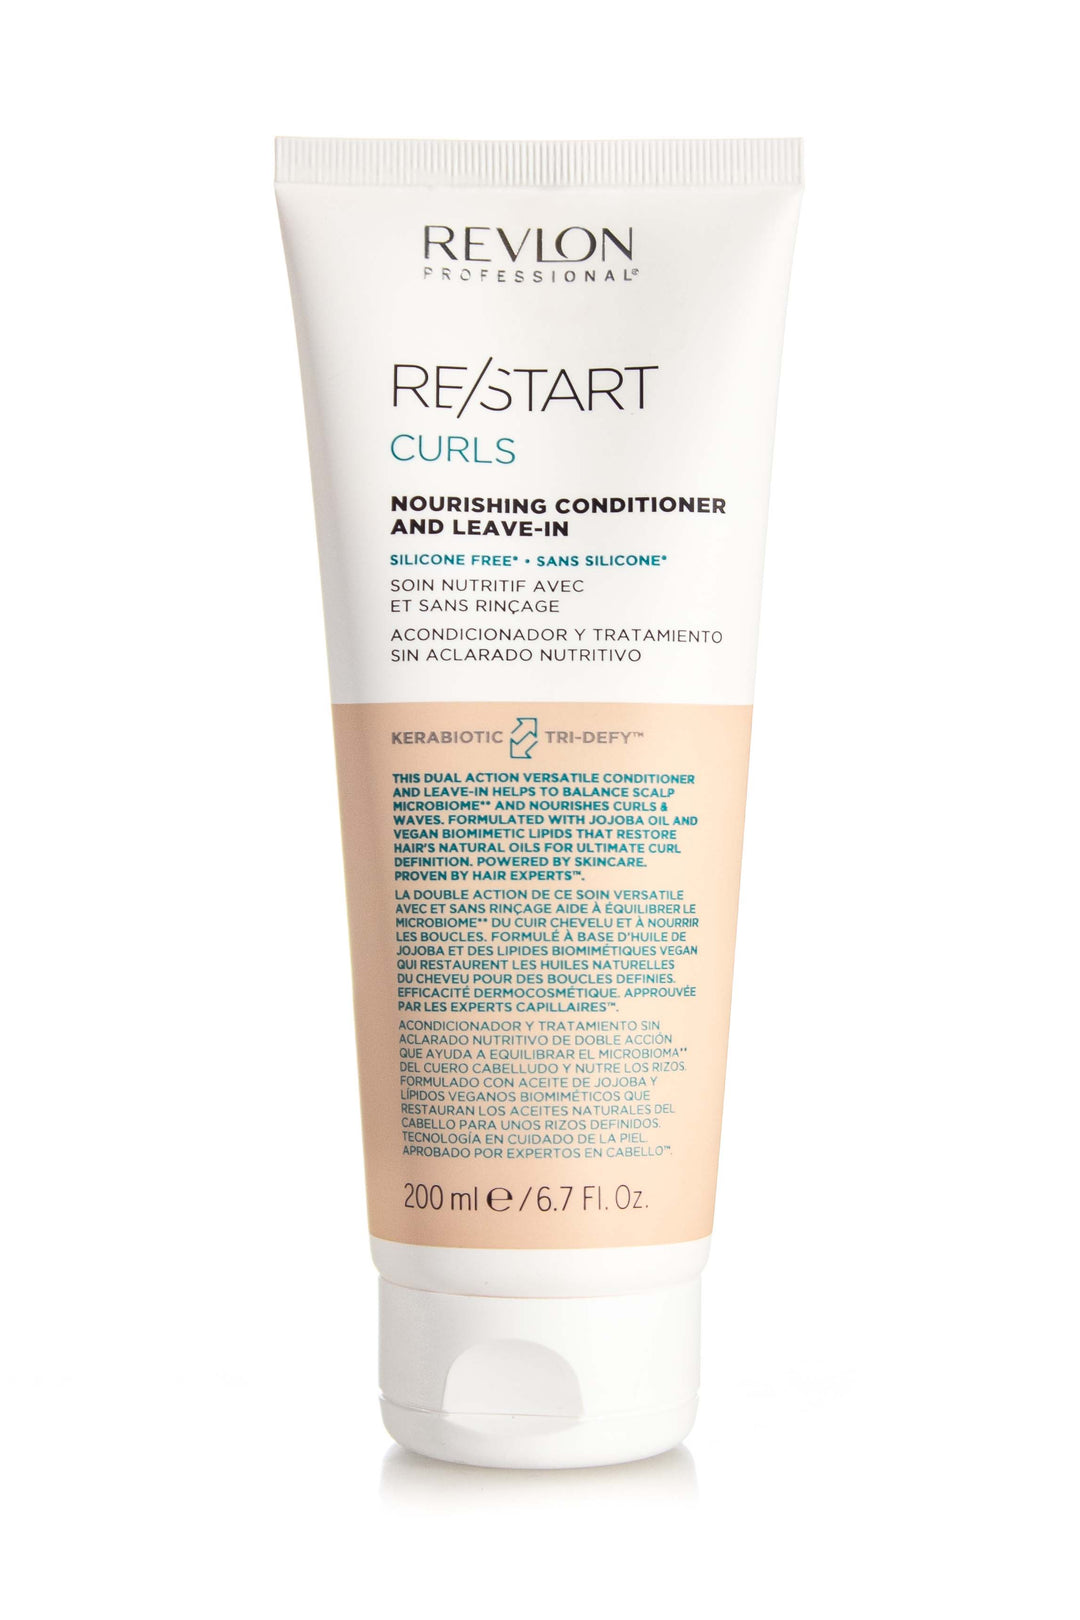 REVLON RESTART Curls Nourishing Conditioner and Leave-In | Various Sizes